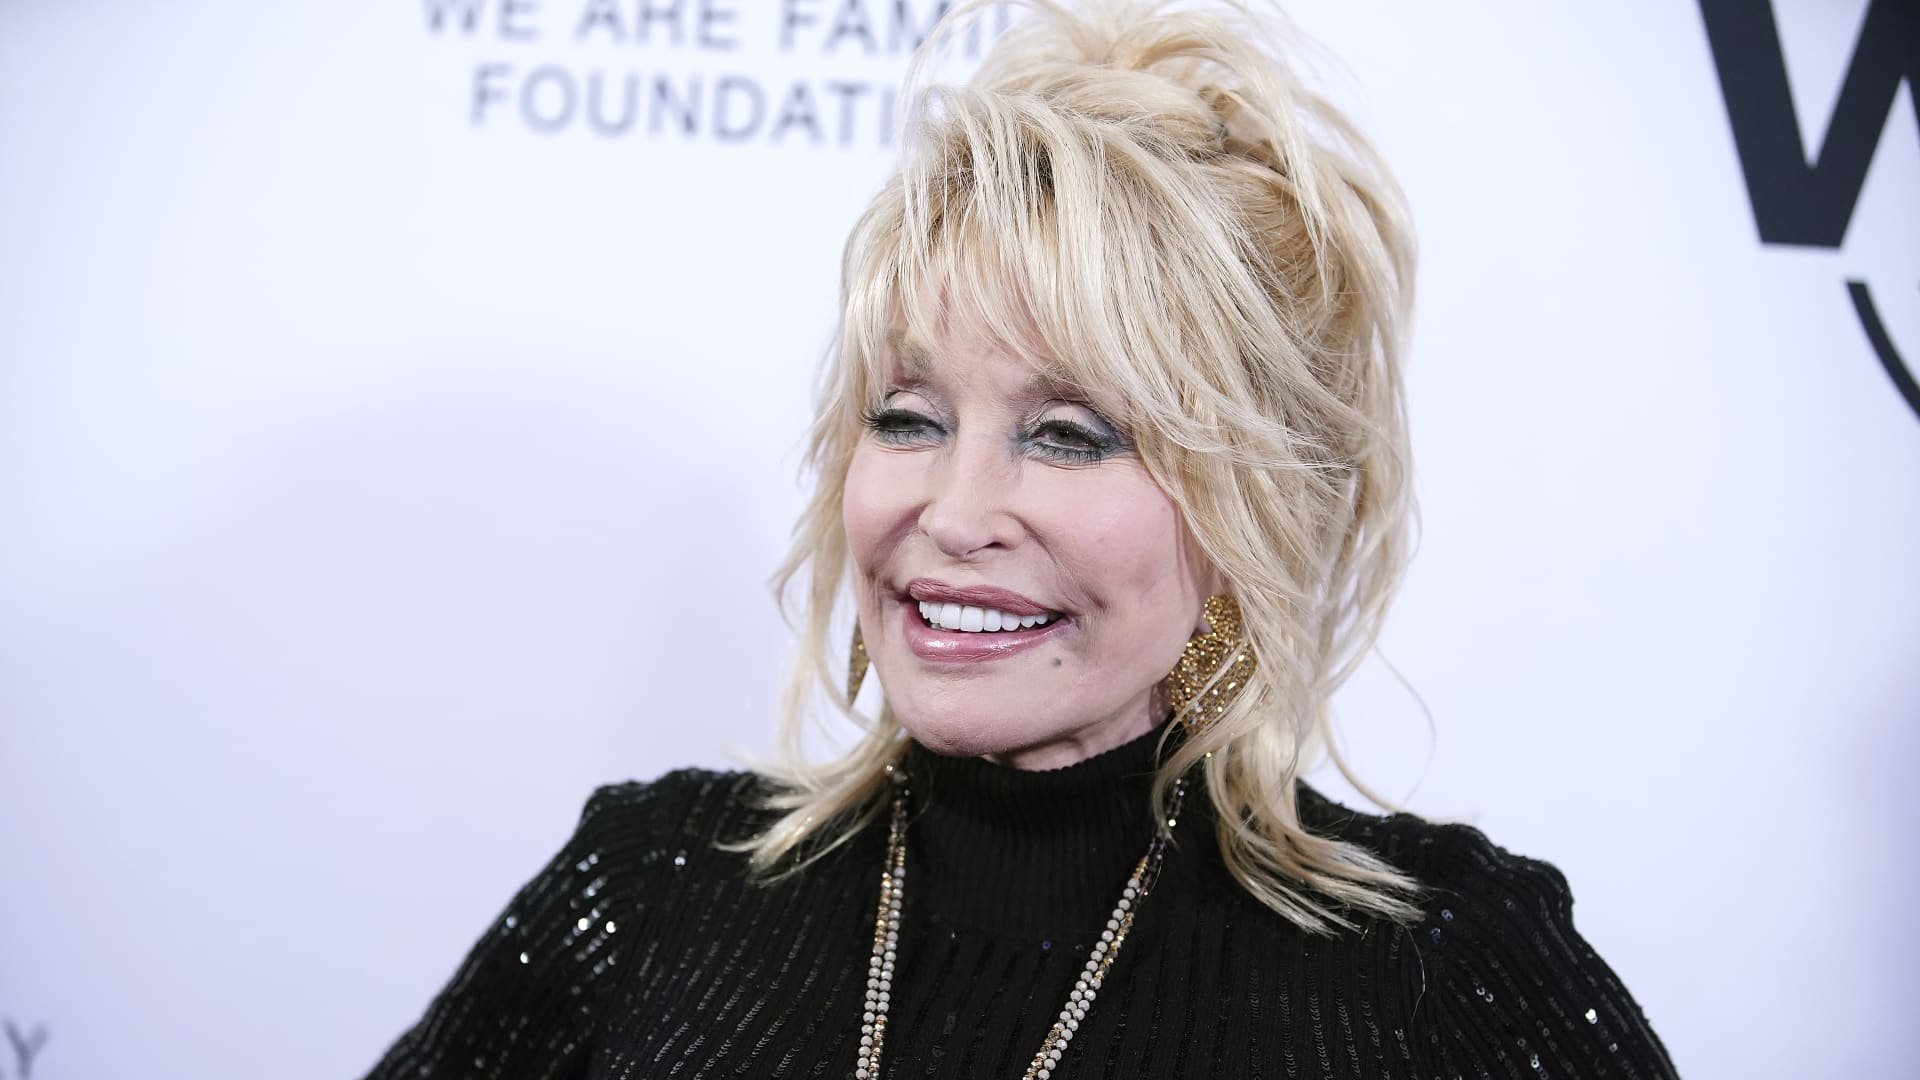 Dolly Parton helped fund the Moderna Covid-19 vaccine that's being called 'a game changer'